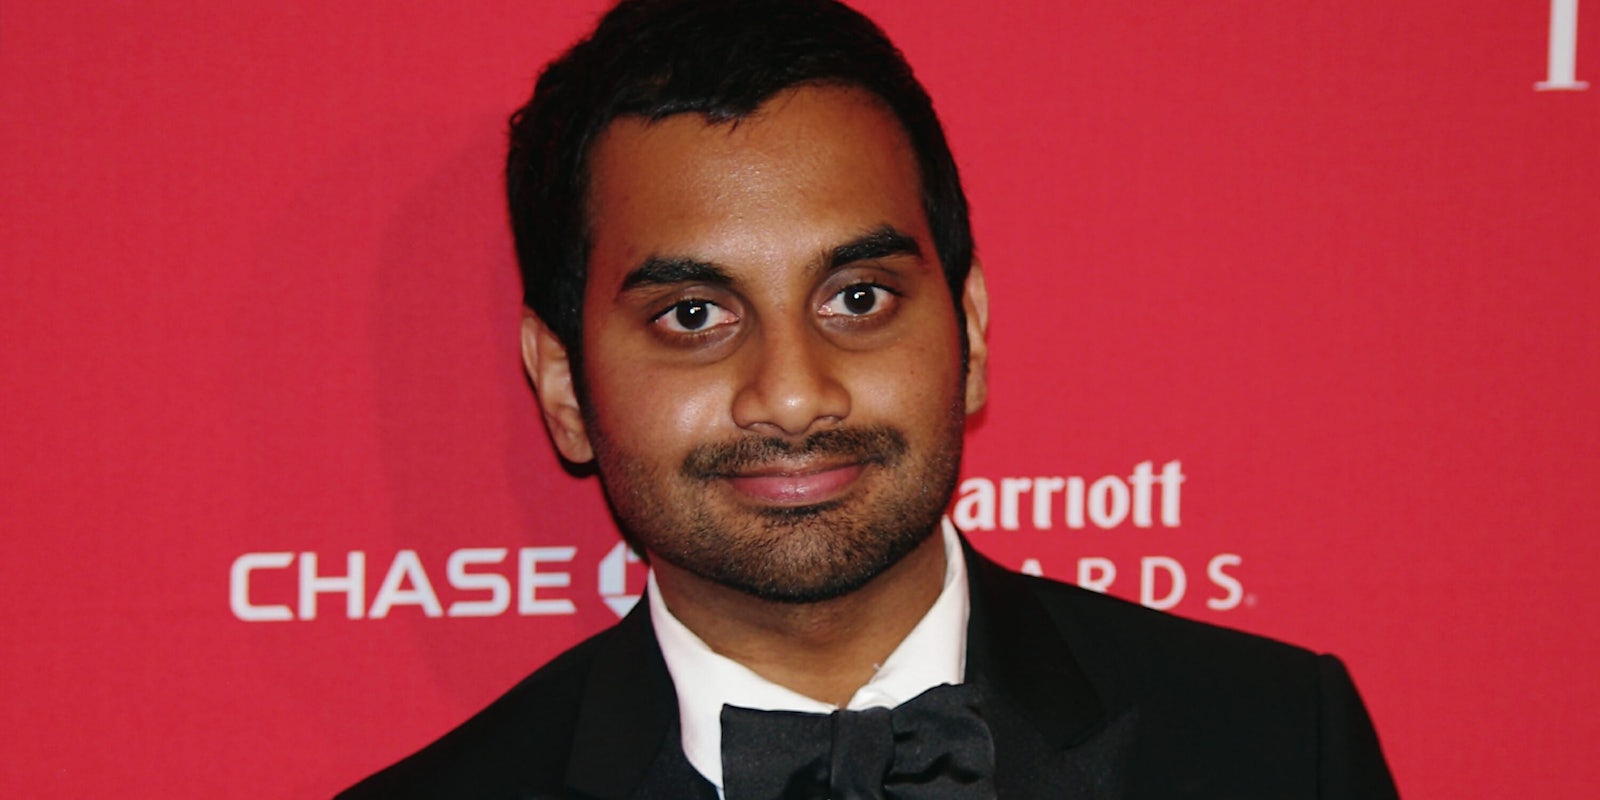 Accusations of sexual assault against Aziz Ansari are raising questions about the #MeToo movement.